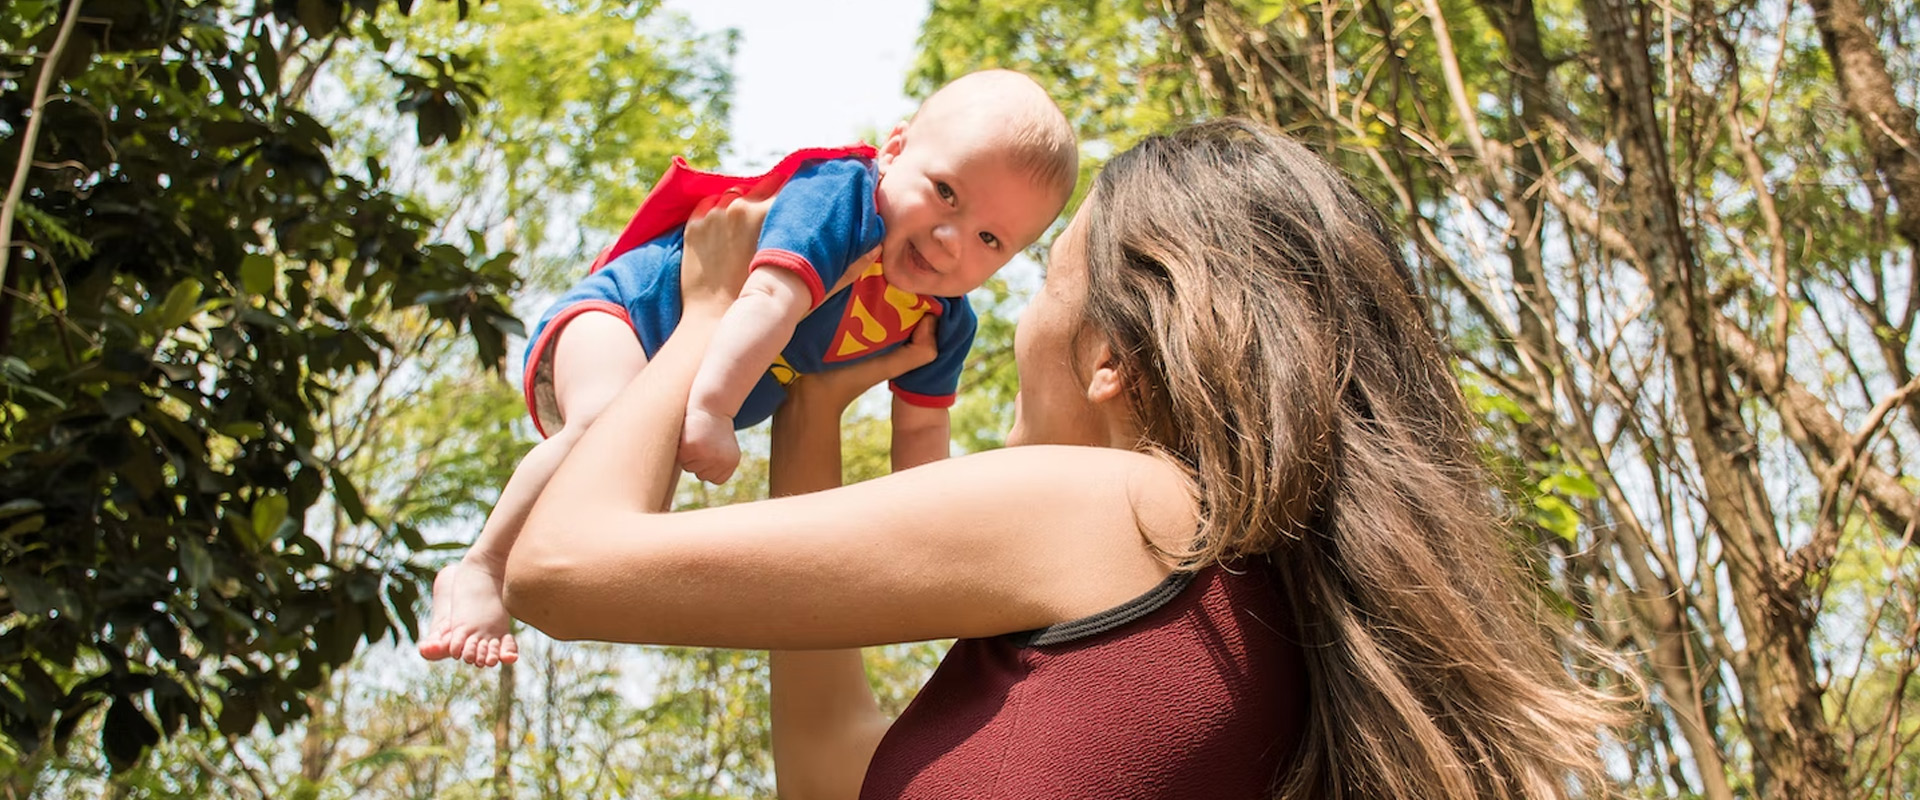 Mom holding baby in superman costume